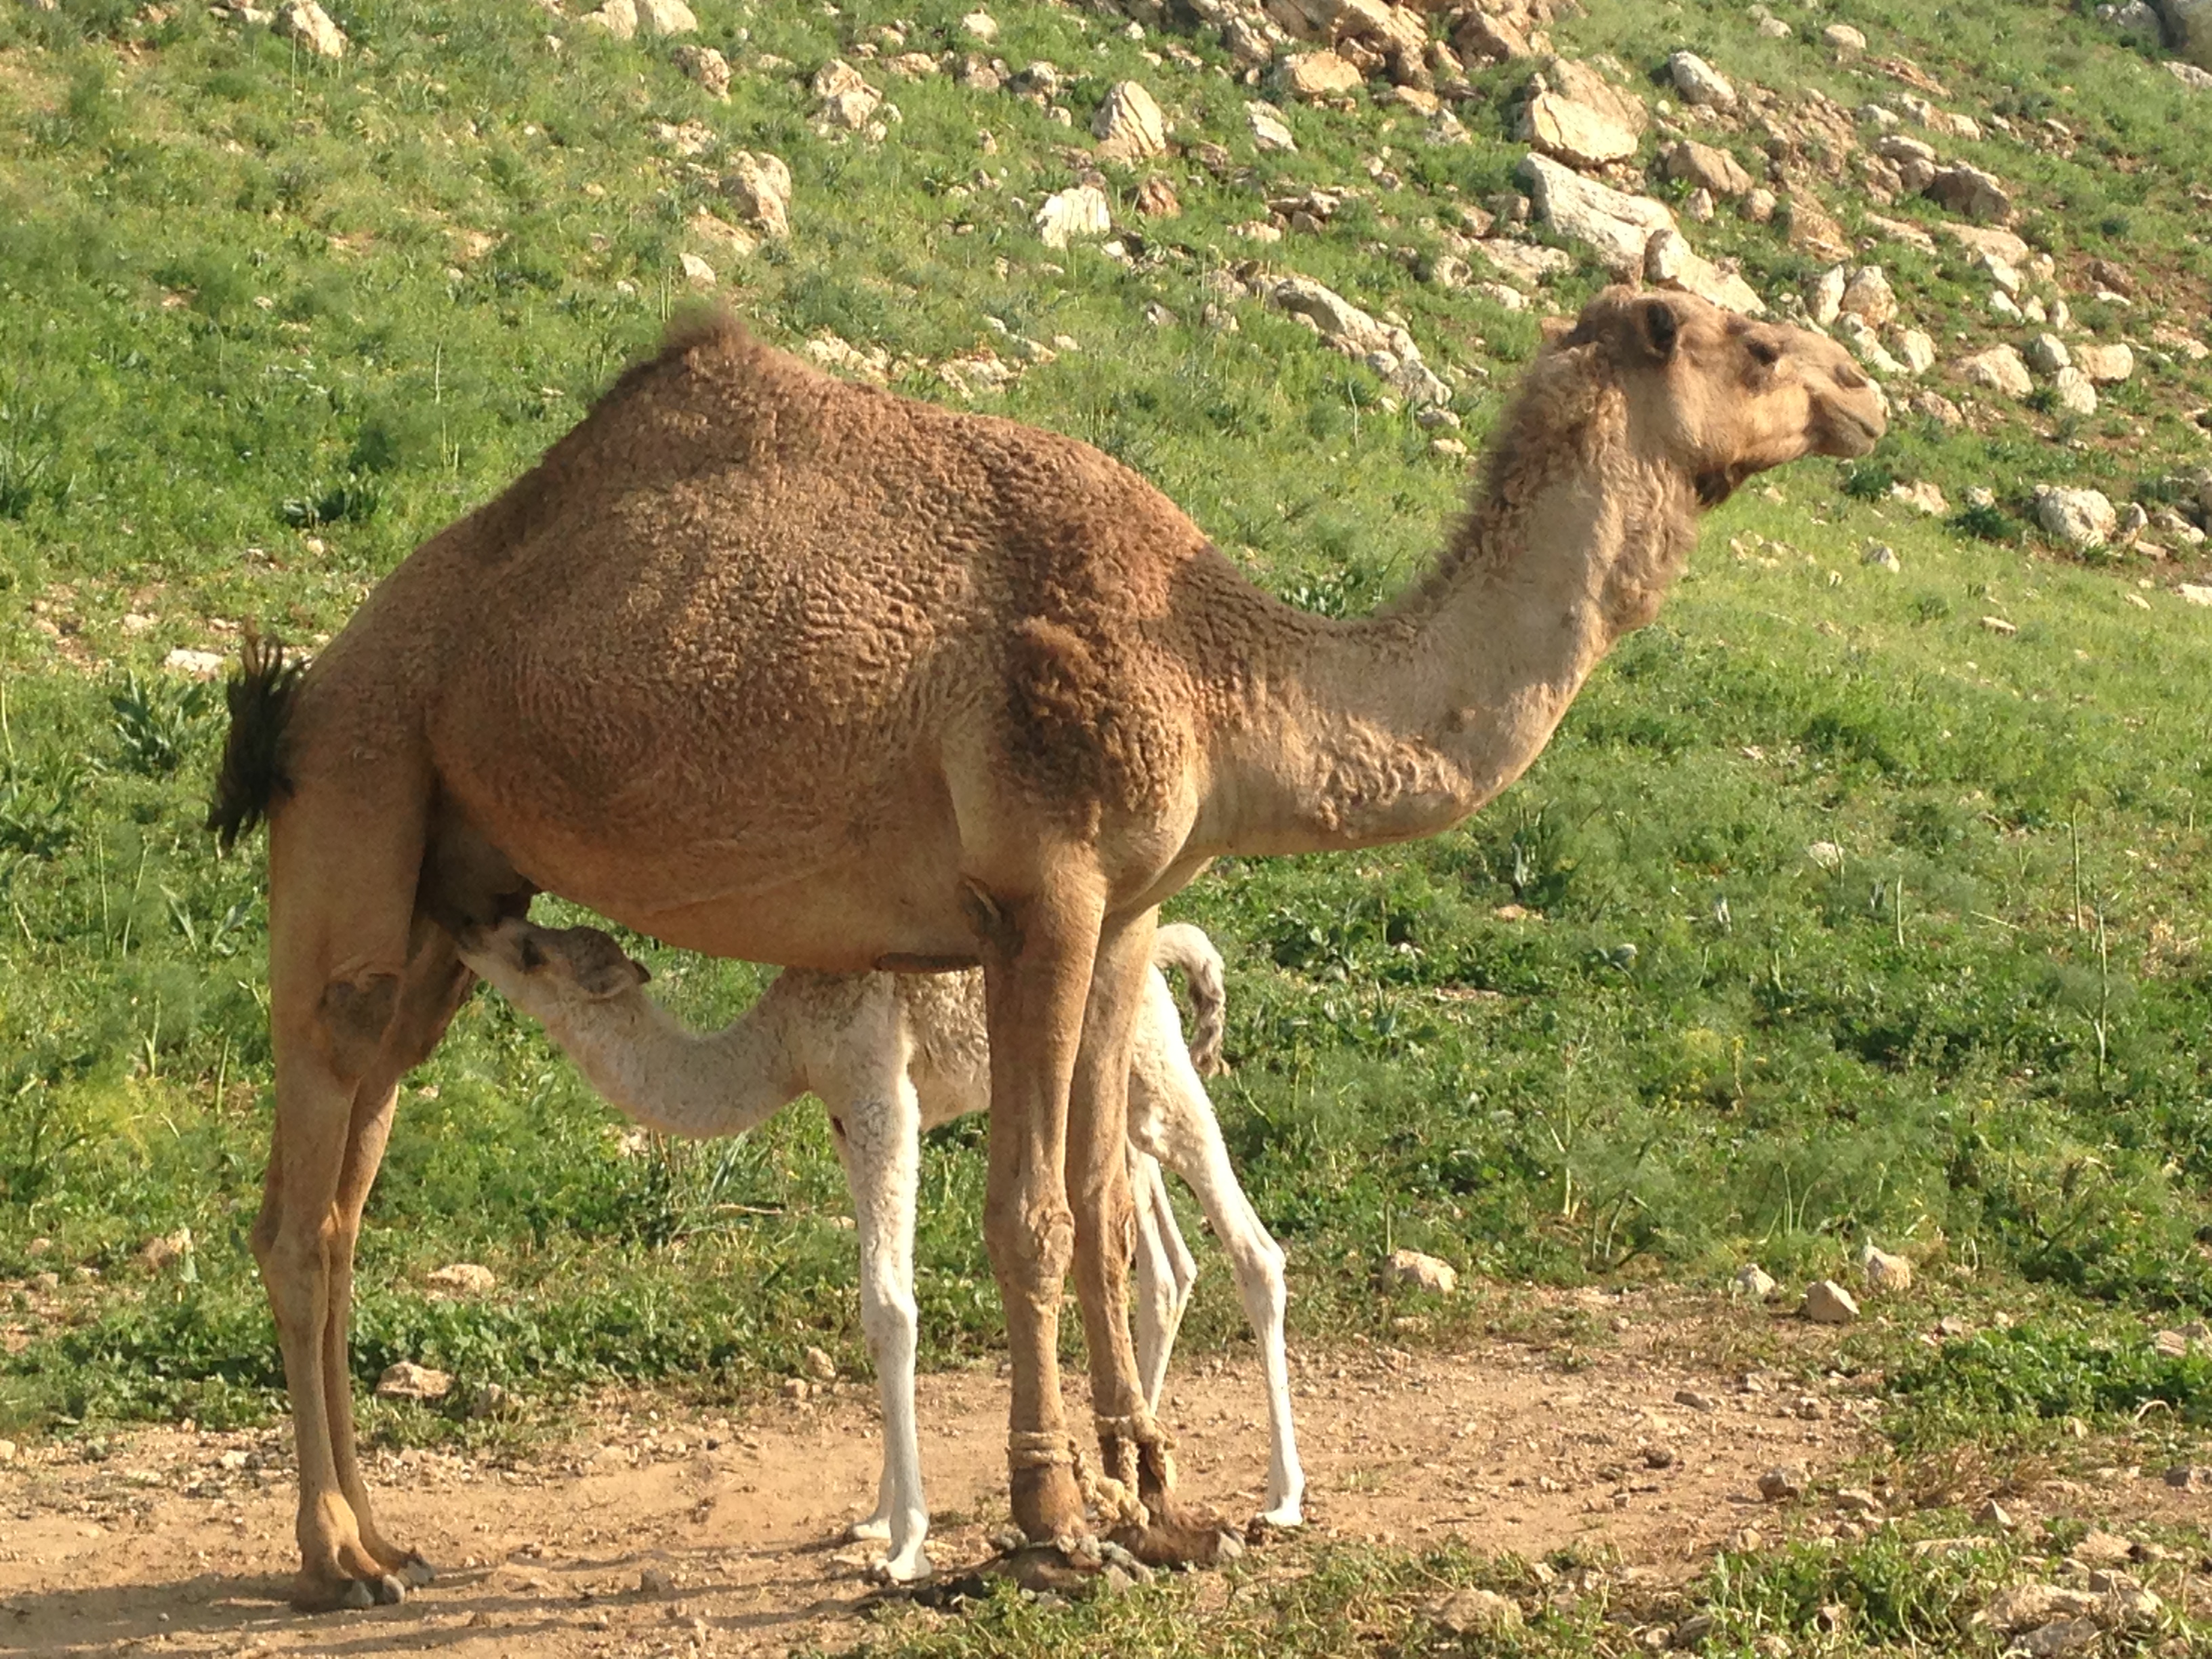 13 Fun Facts About Camels | SPANA